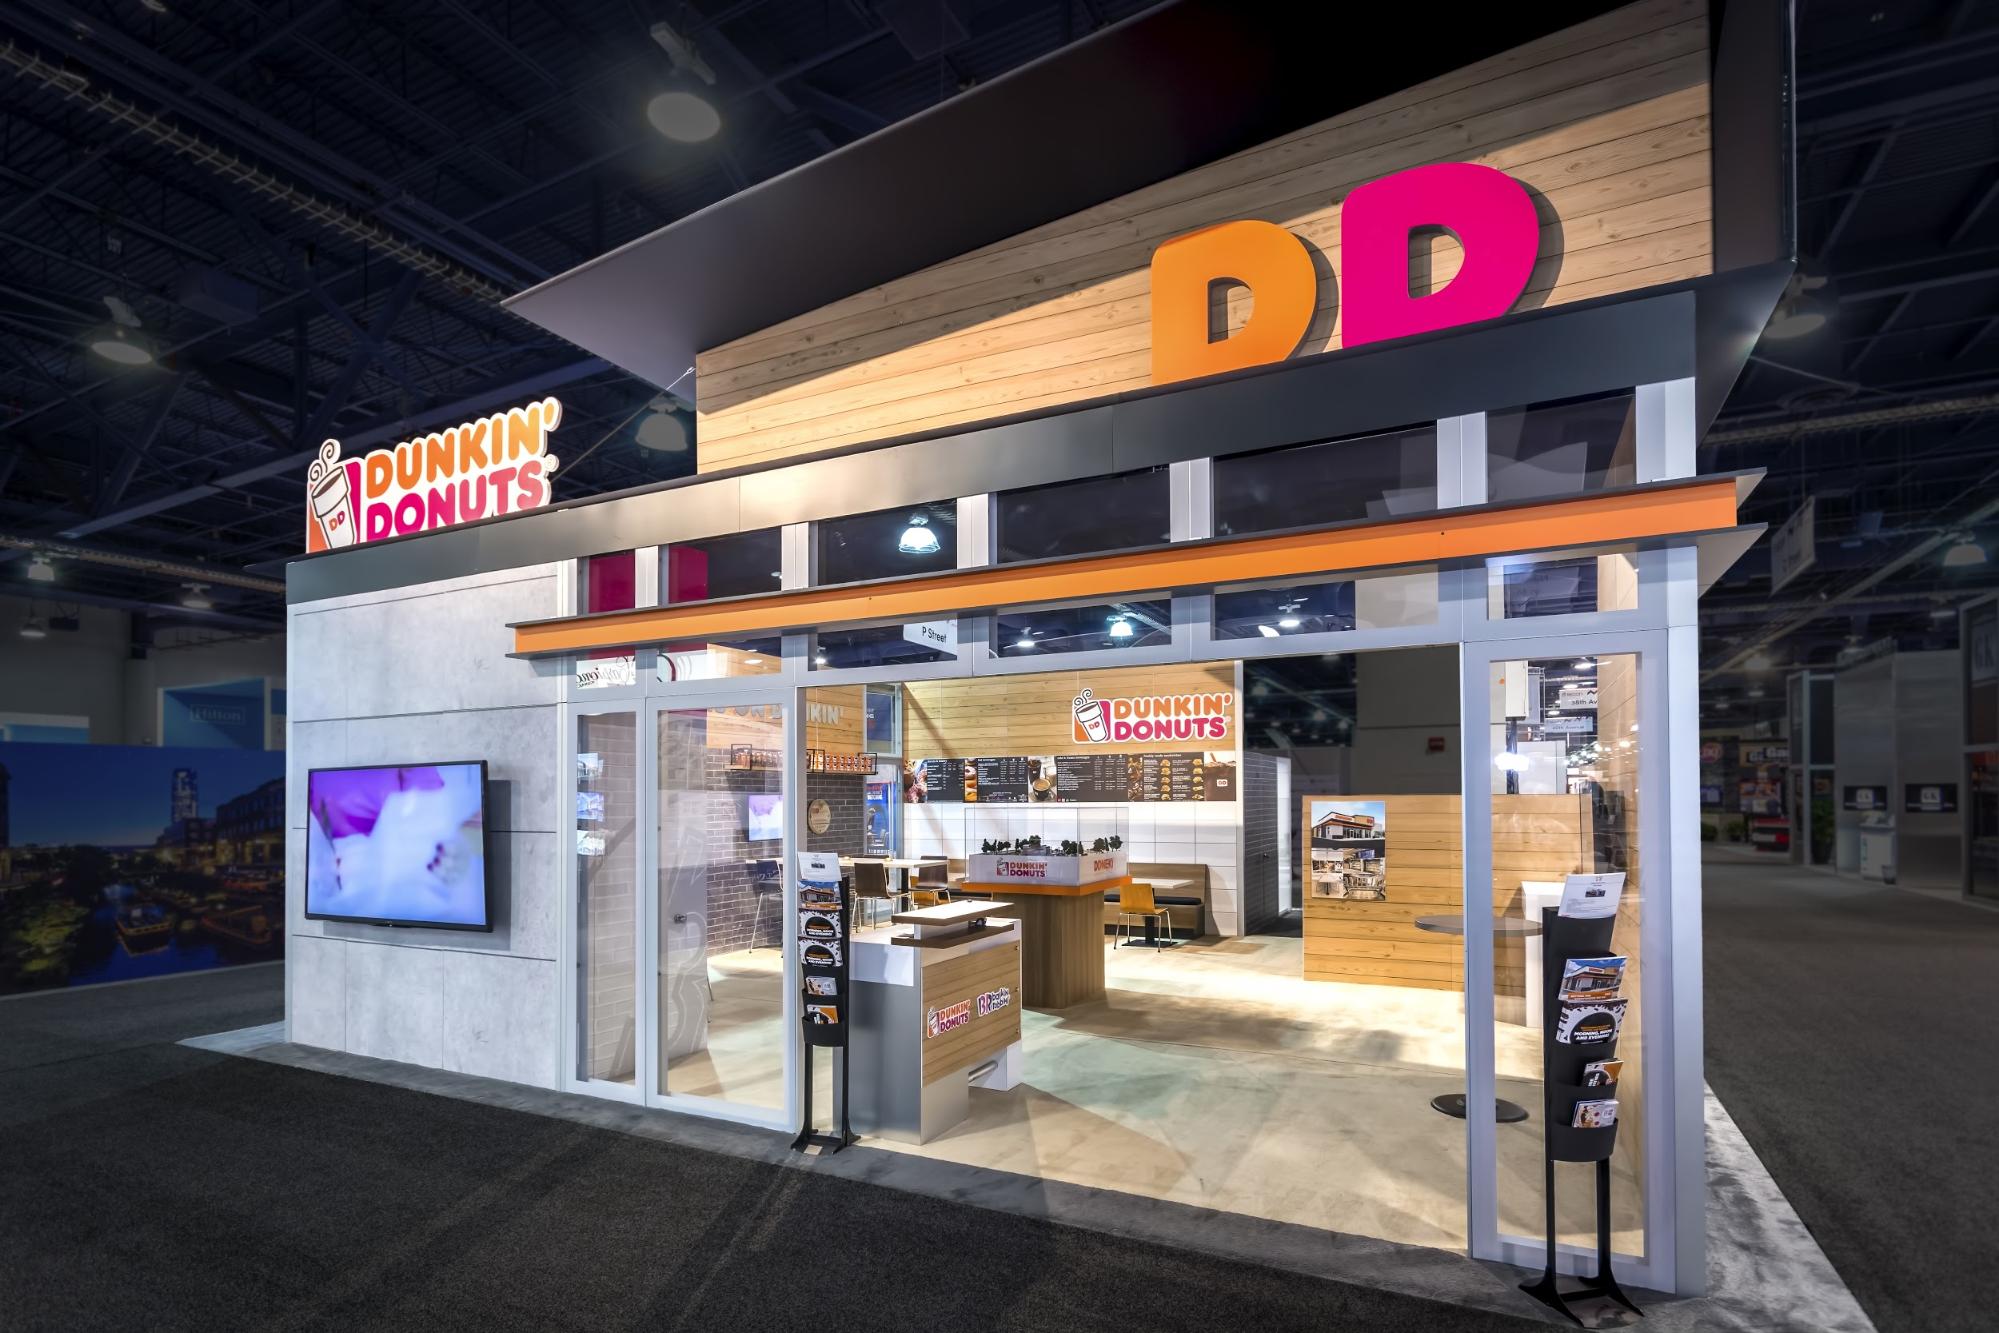 Dunkin’ Donuts Branded Environment